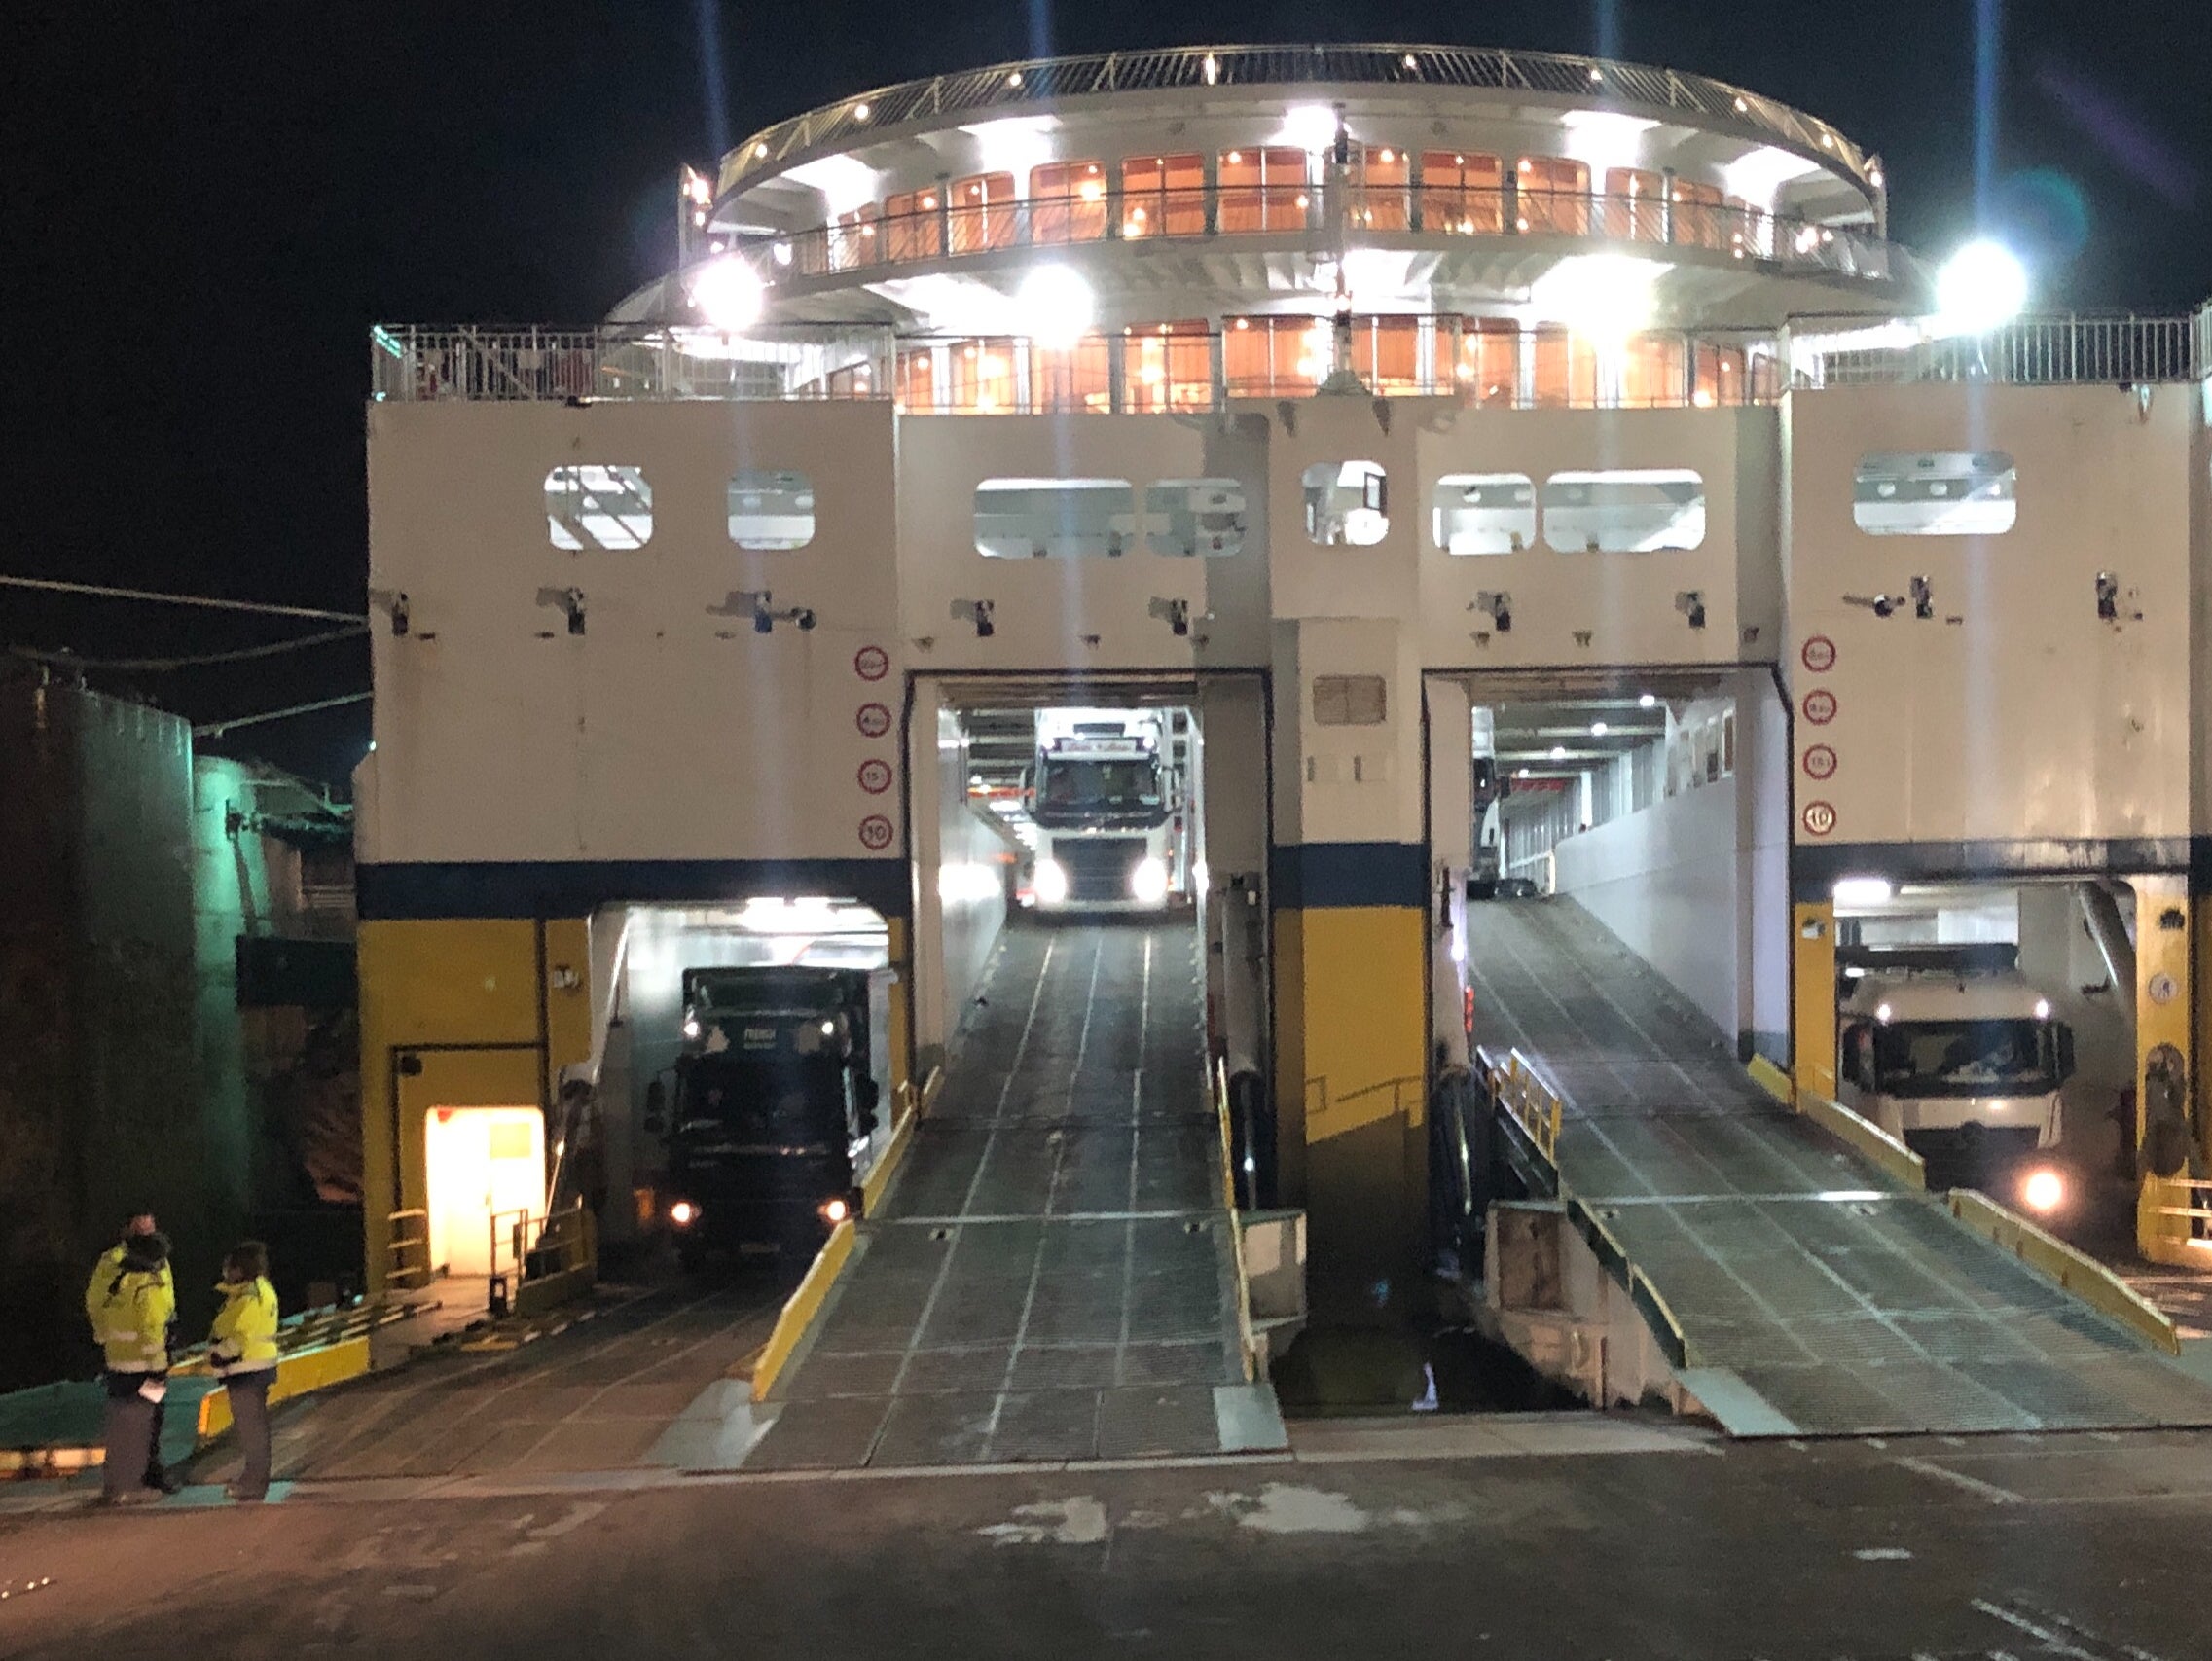 International rescue: the ferry provided the earliest arrival in France